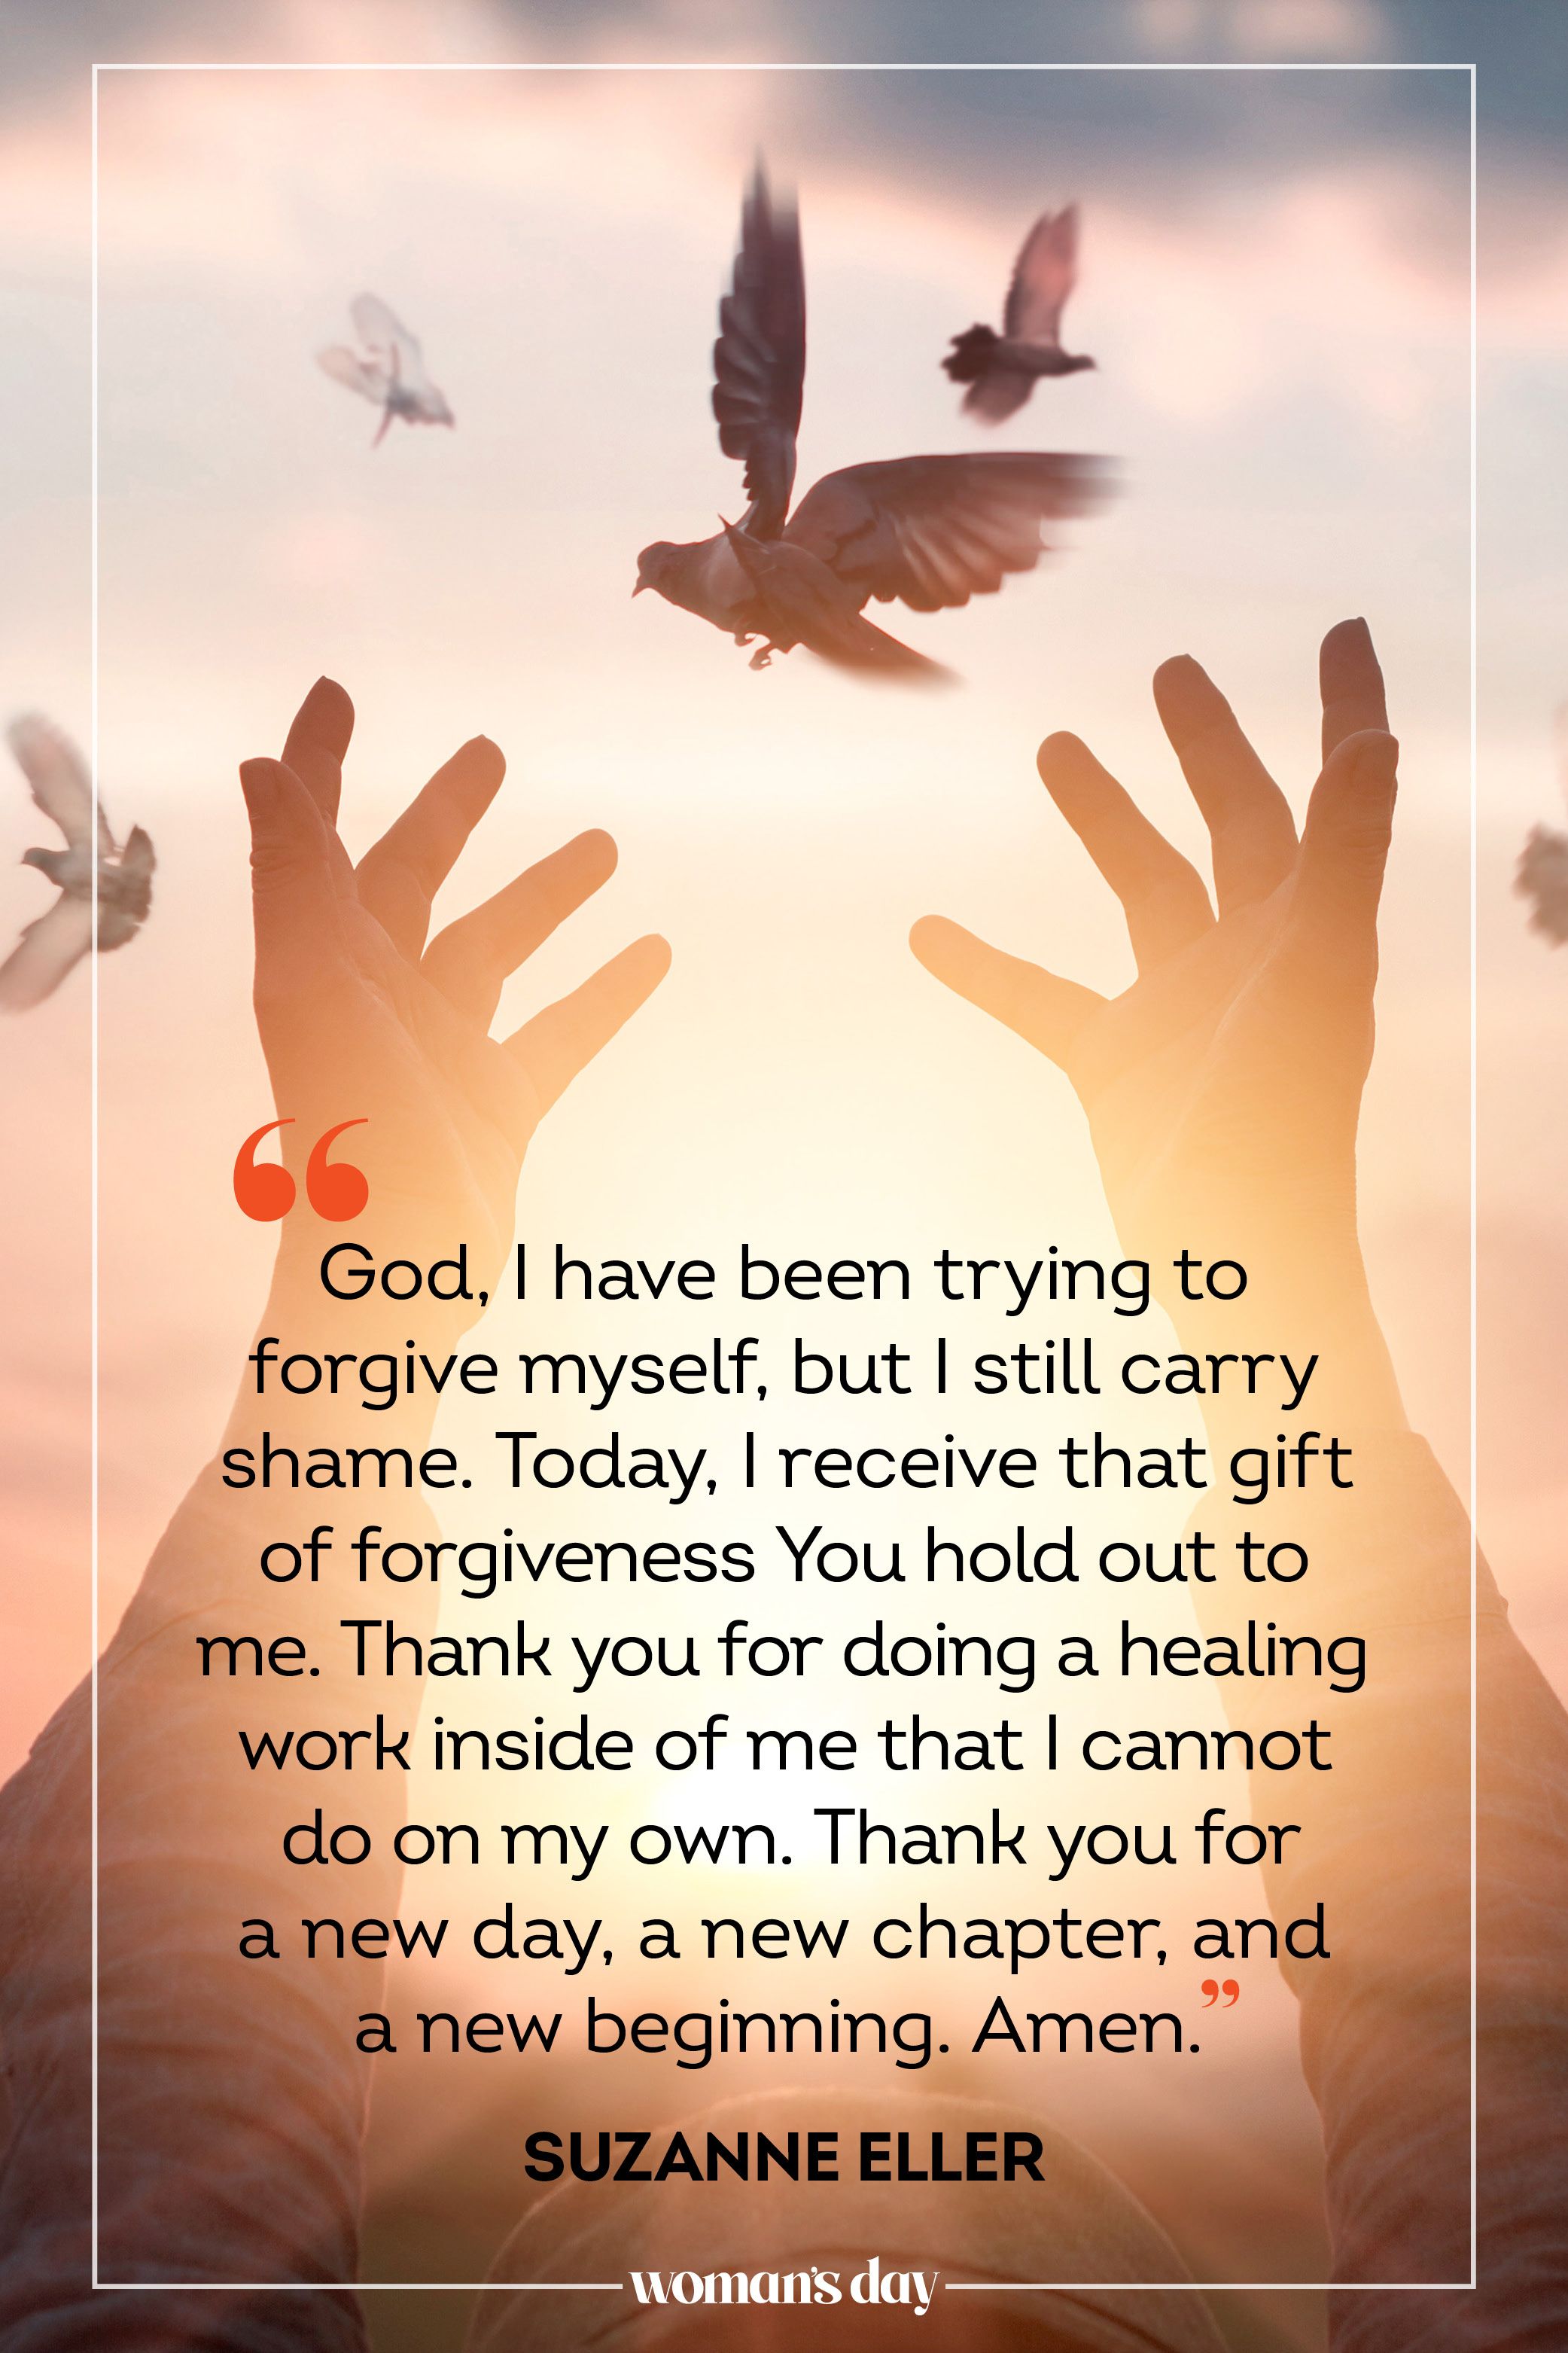 Forgiveness is a pure gift from God | The Apopka Voice